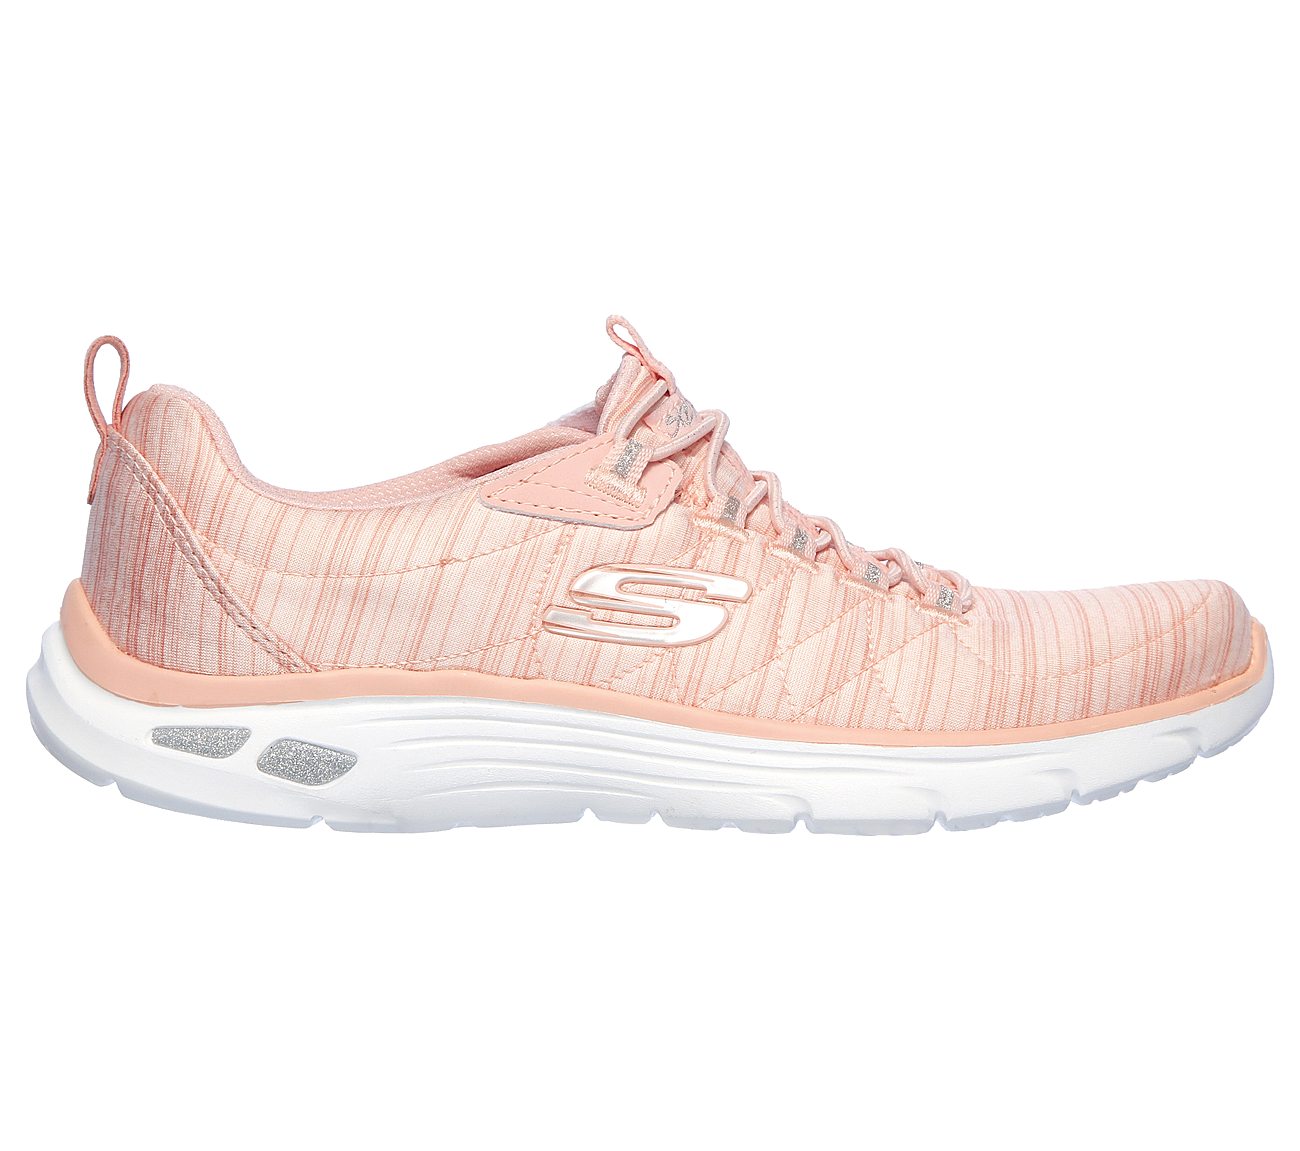 skechers relaxed fit sport review